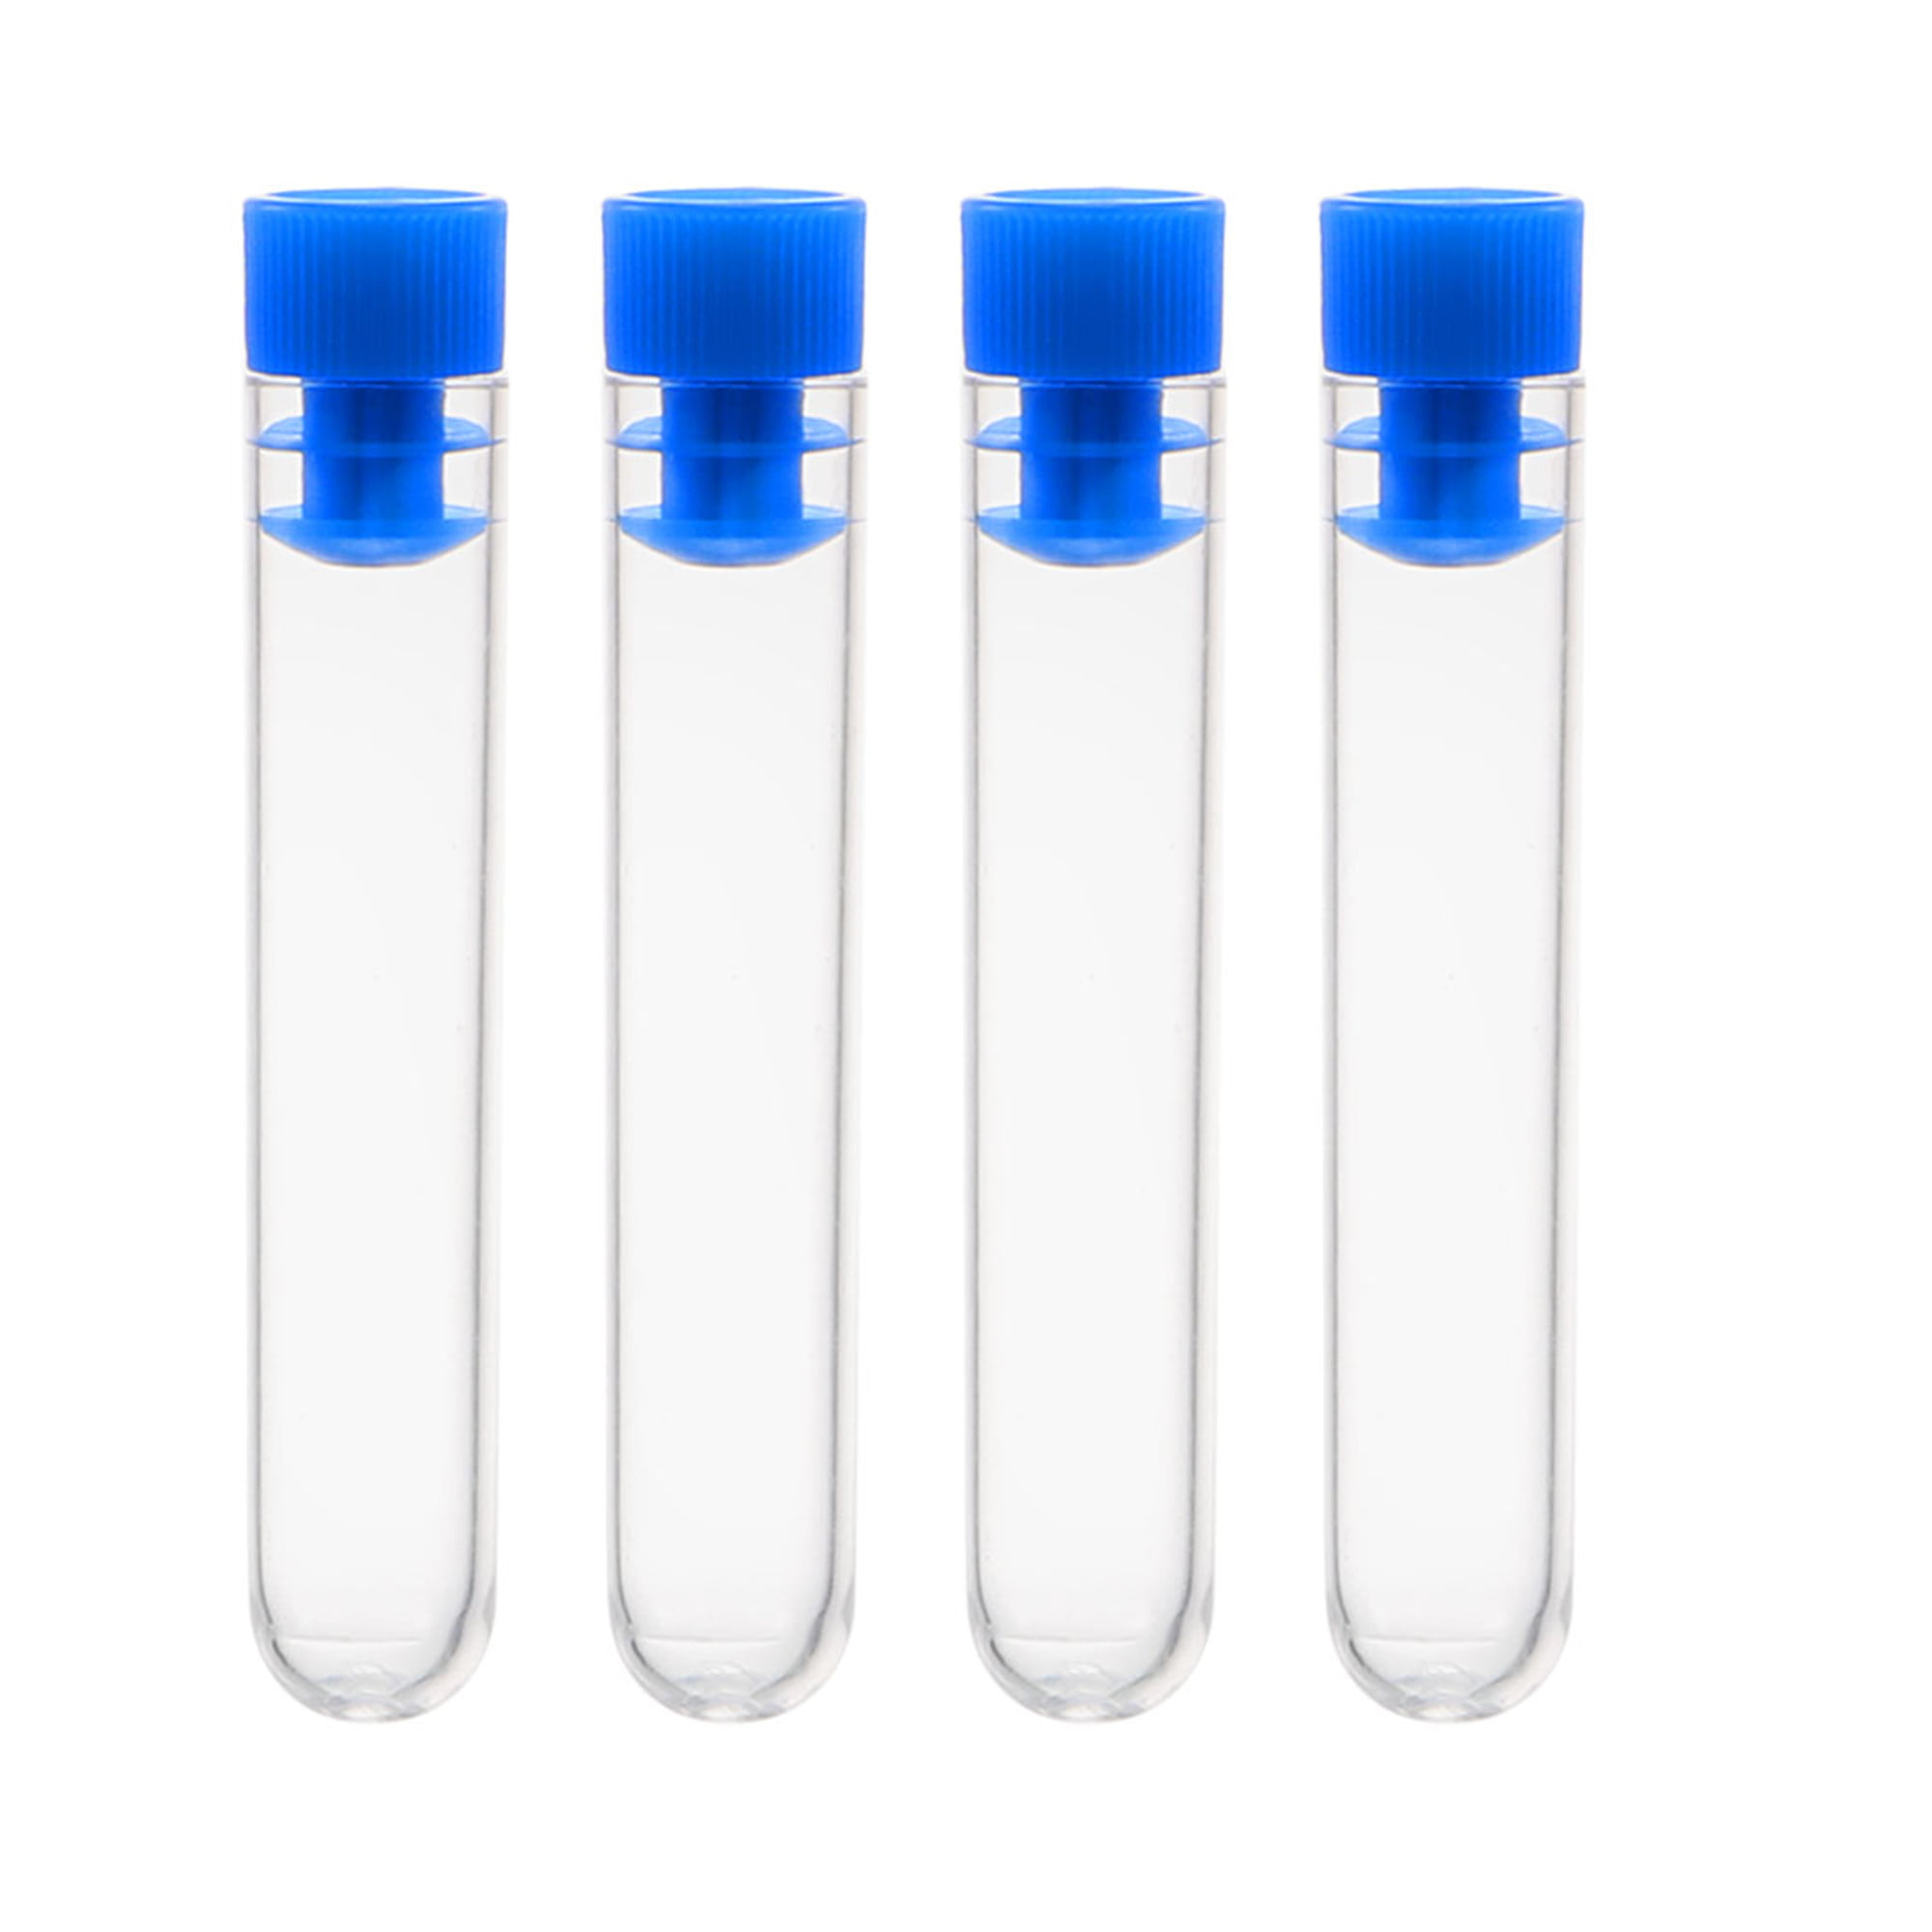 uxcell 30 Pcs Centrifuge Test Tubes Round Bottom Polystyrene with Blue Cap 12 x 60mm 